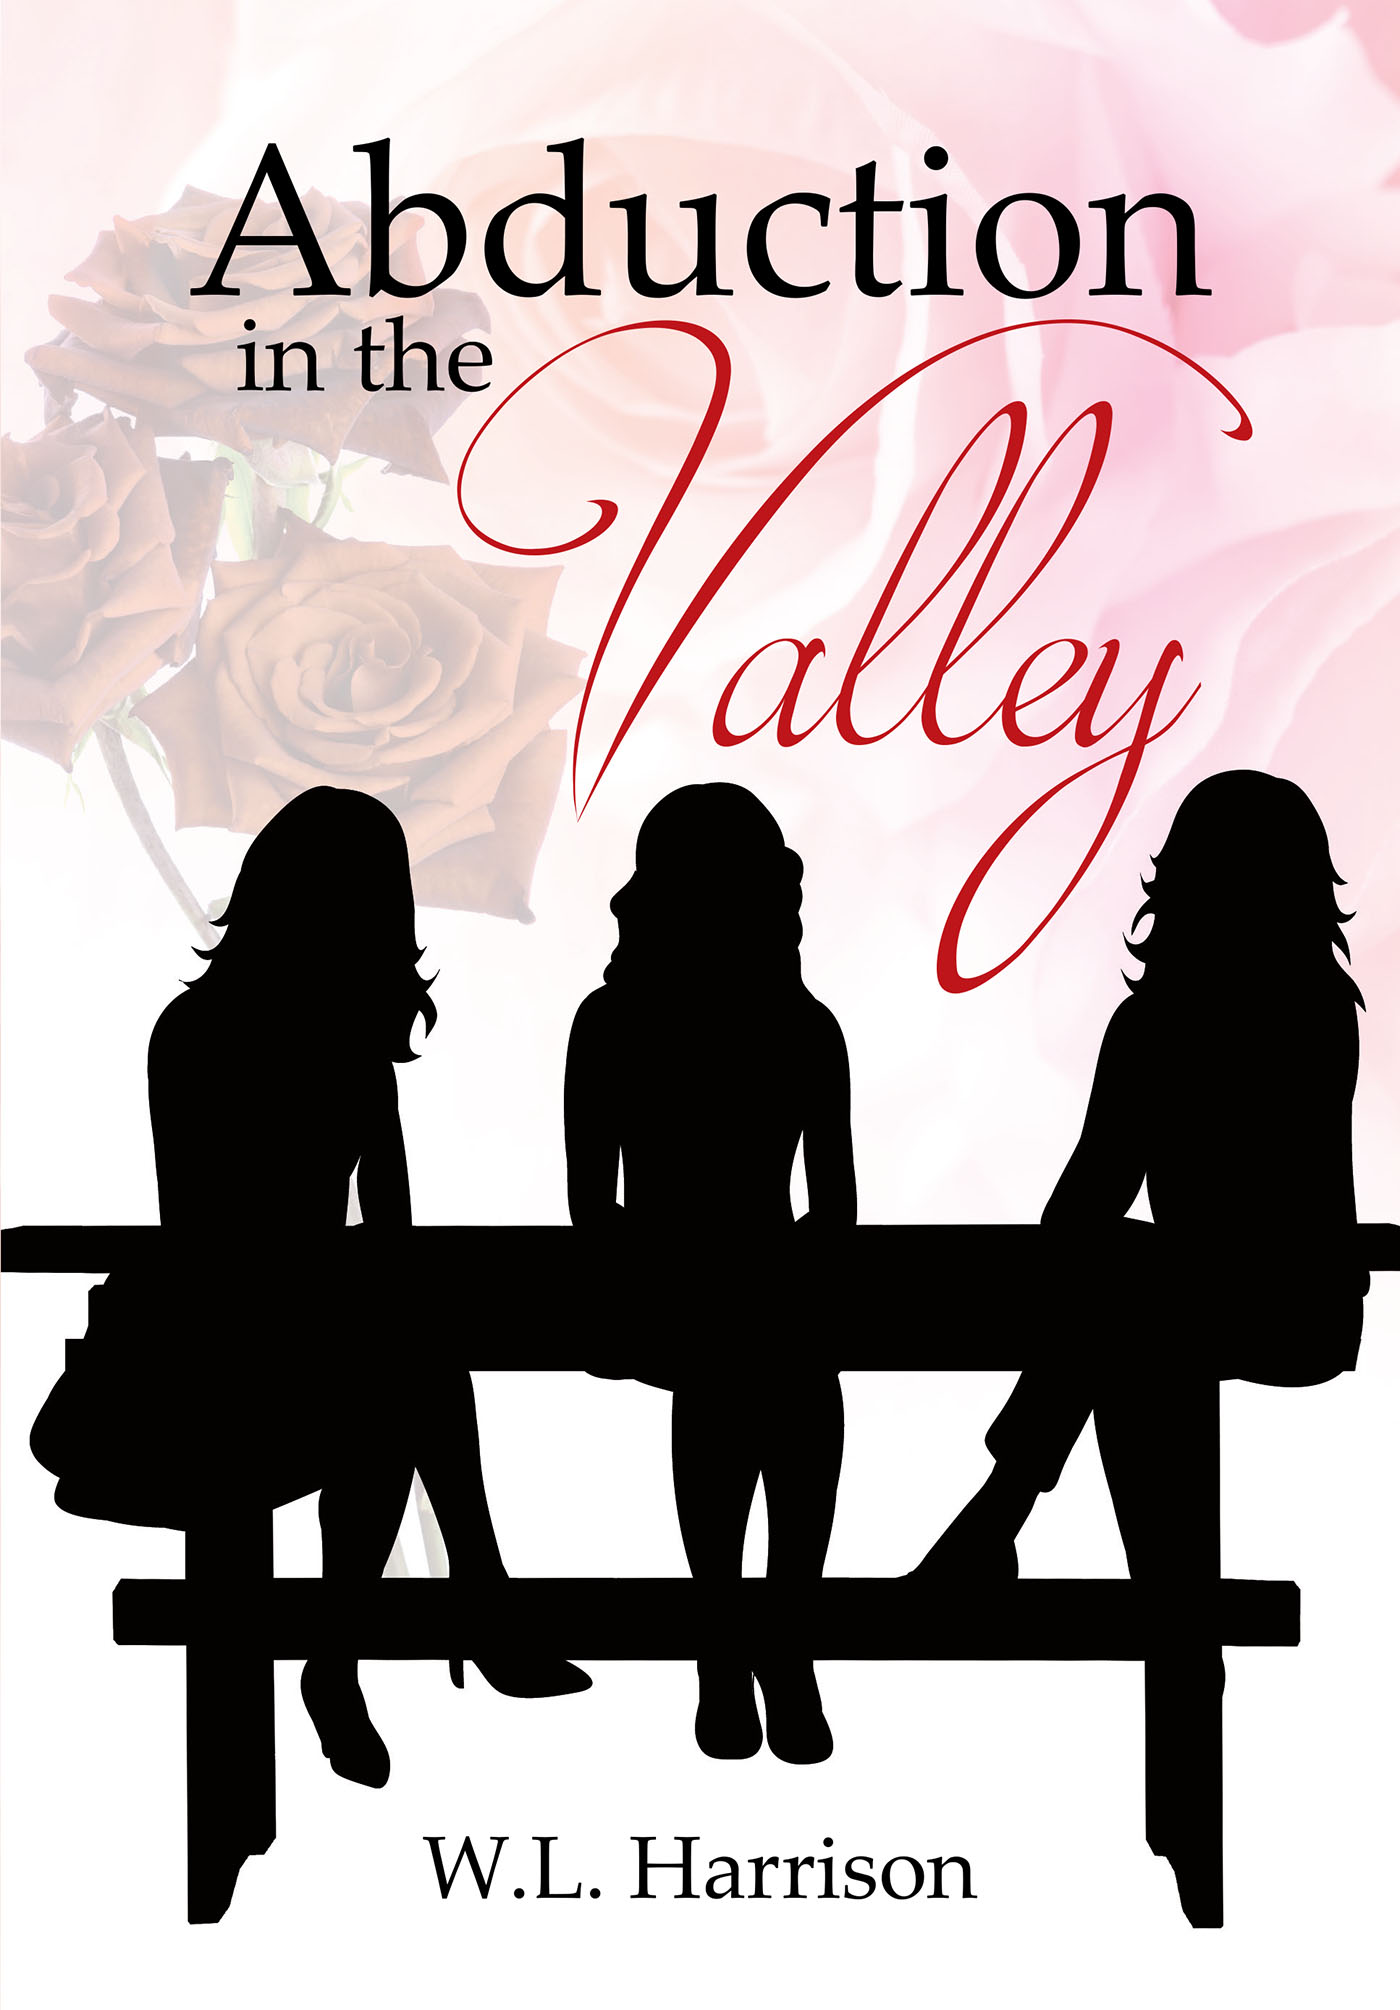 Author W.L. Harrison’s Mew Book, “Abduction in the Valley,” is a Fun and Light Story with Suspense and Flirtatious Romance About a Man Who Witnesses an Abduction